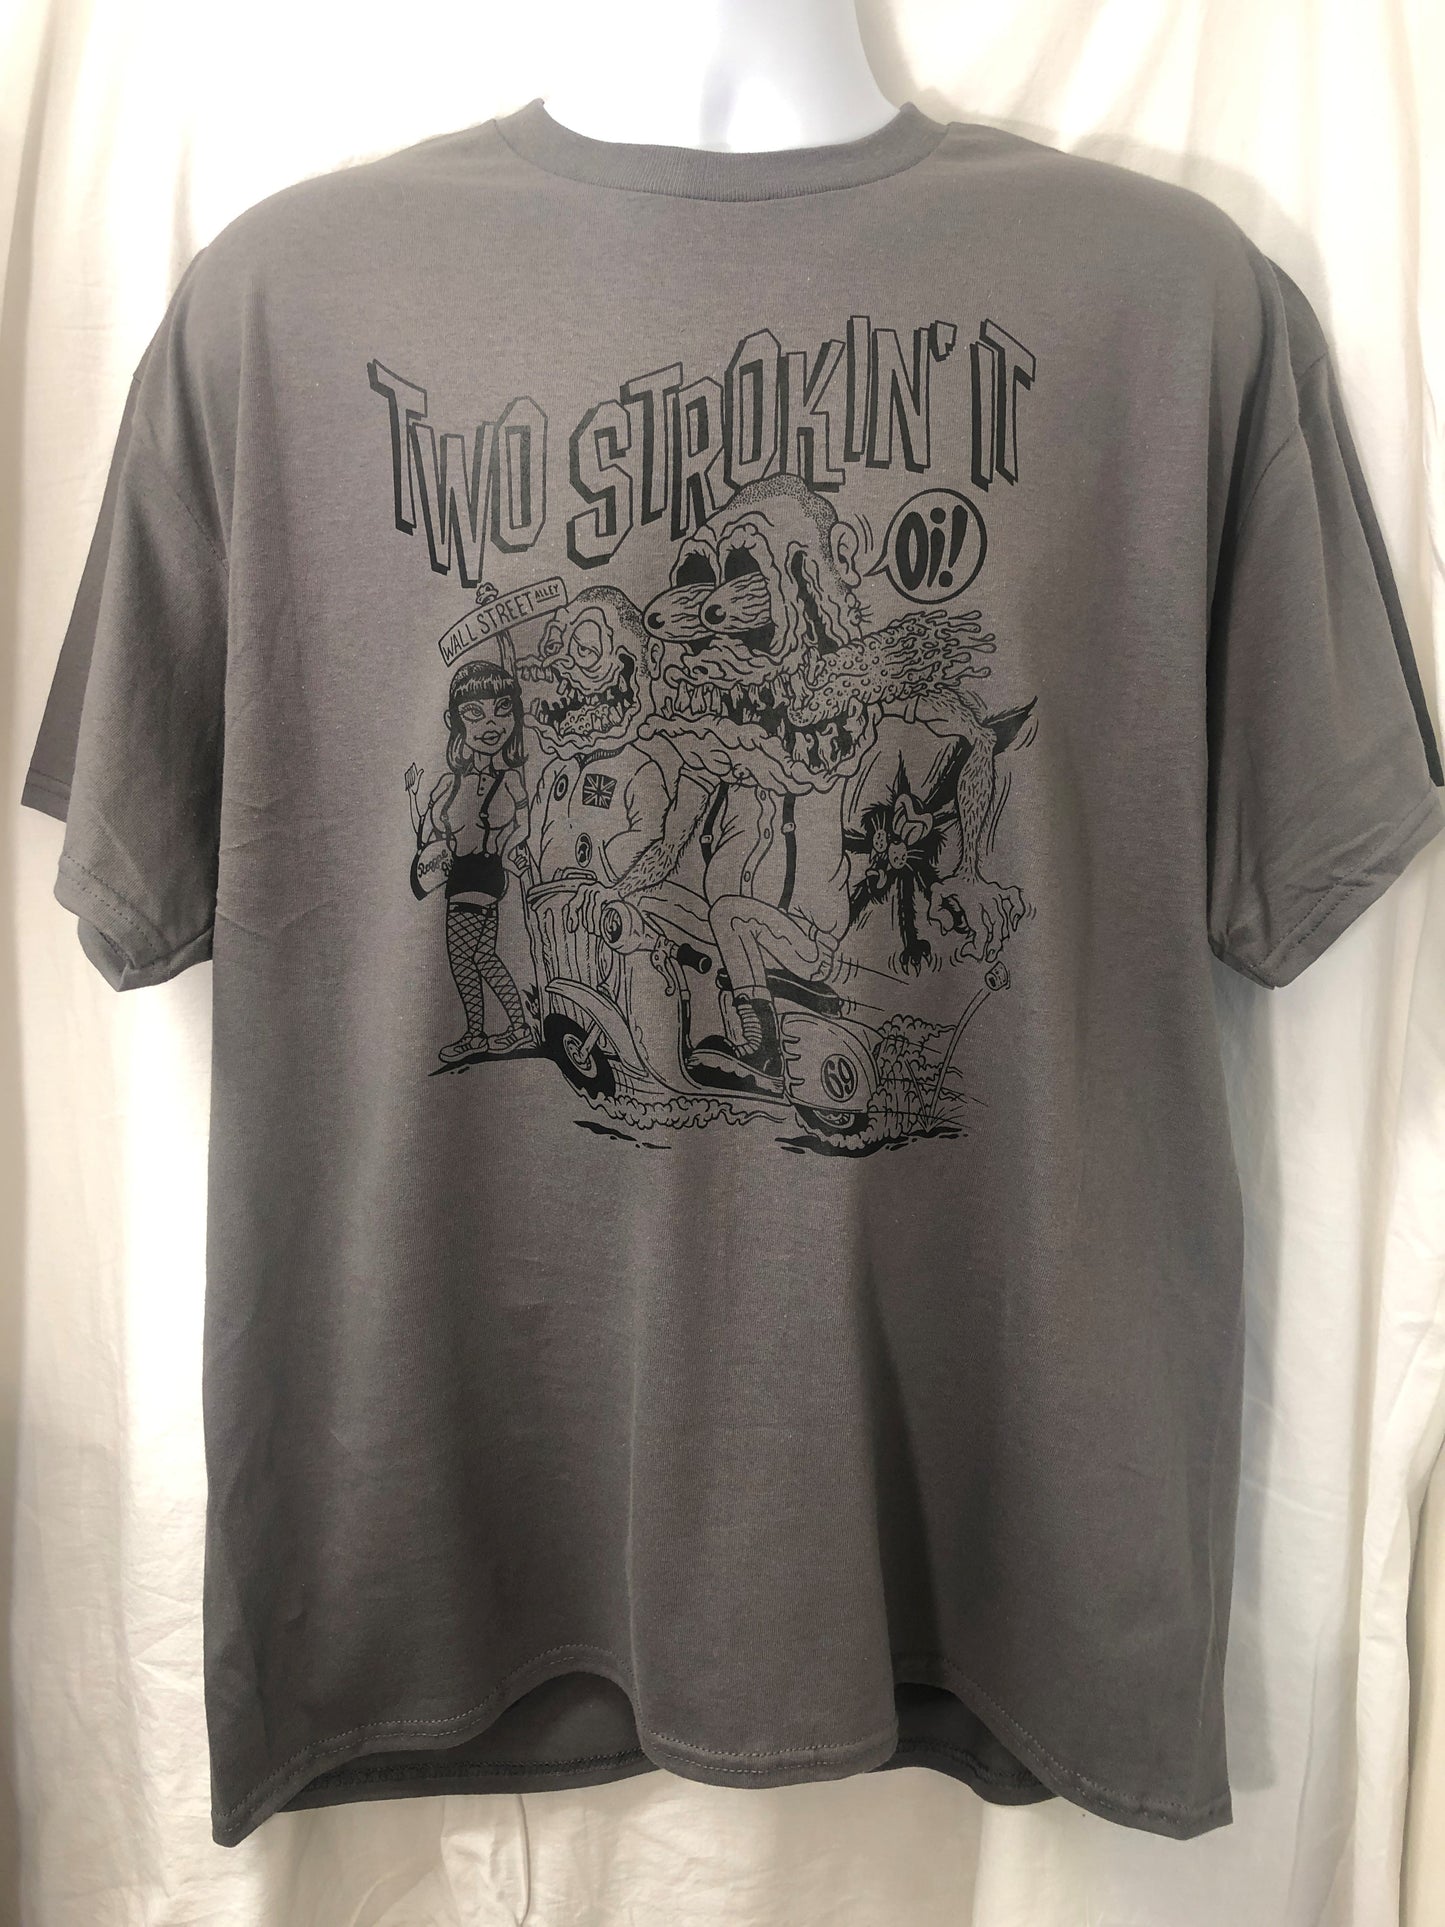 Skinhead Girl Scooter Oi Way of Life T-shirt